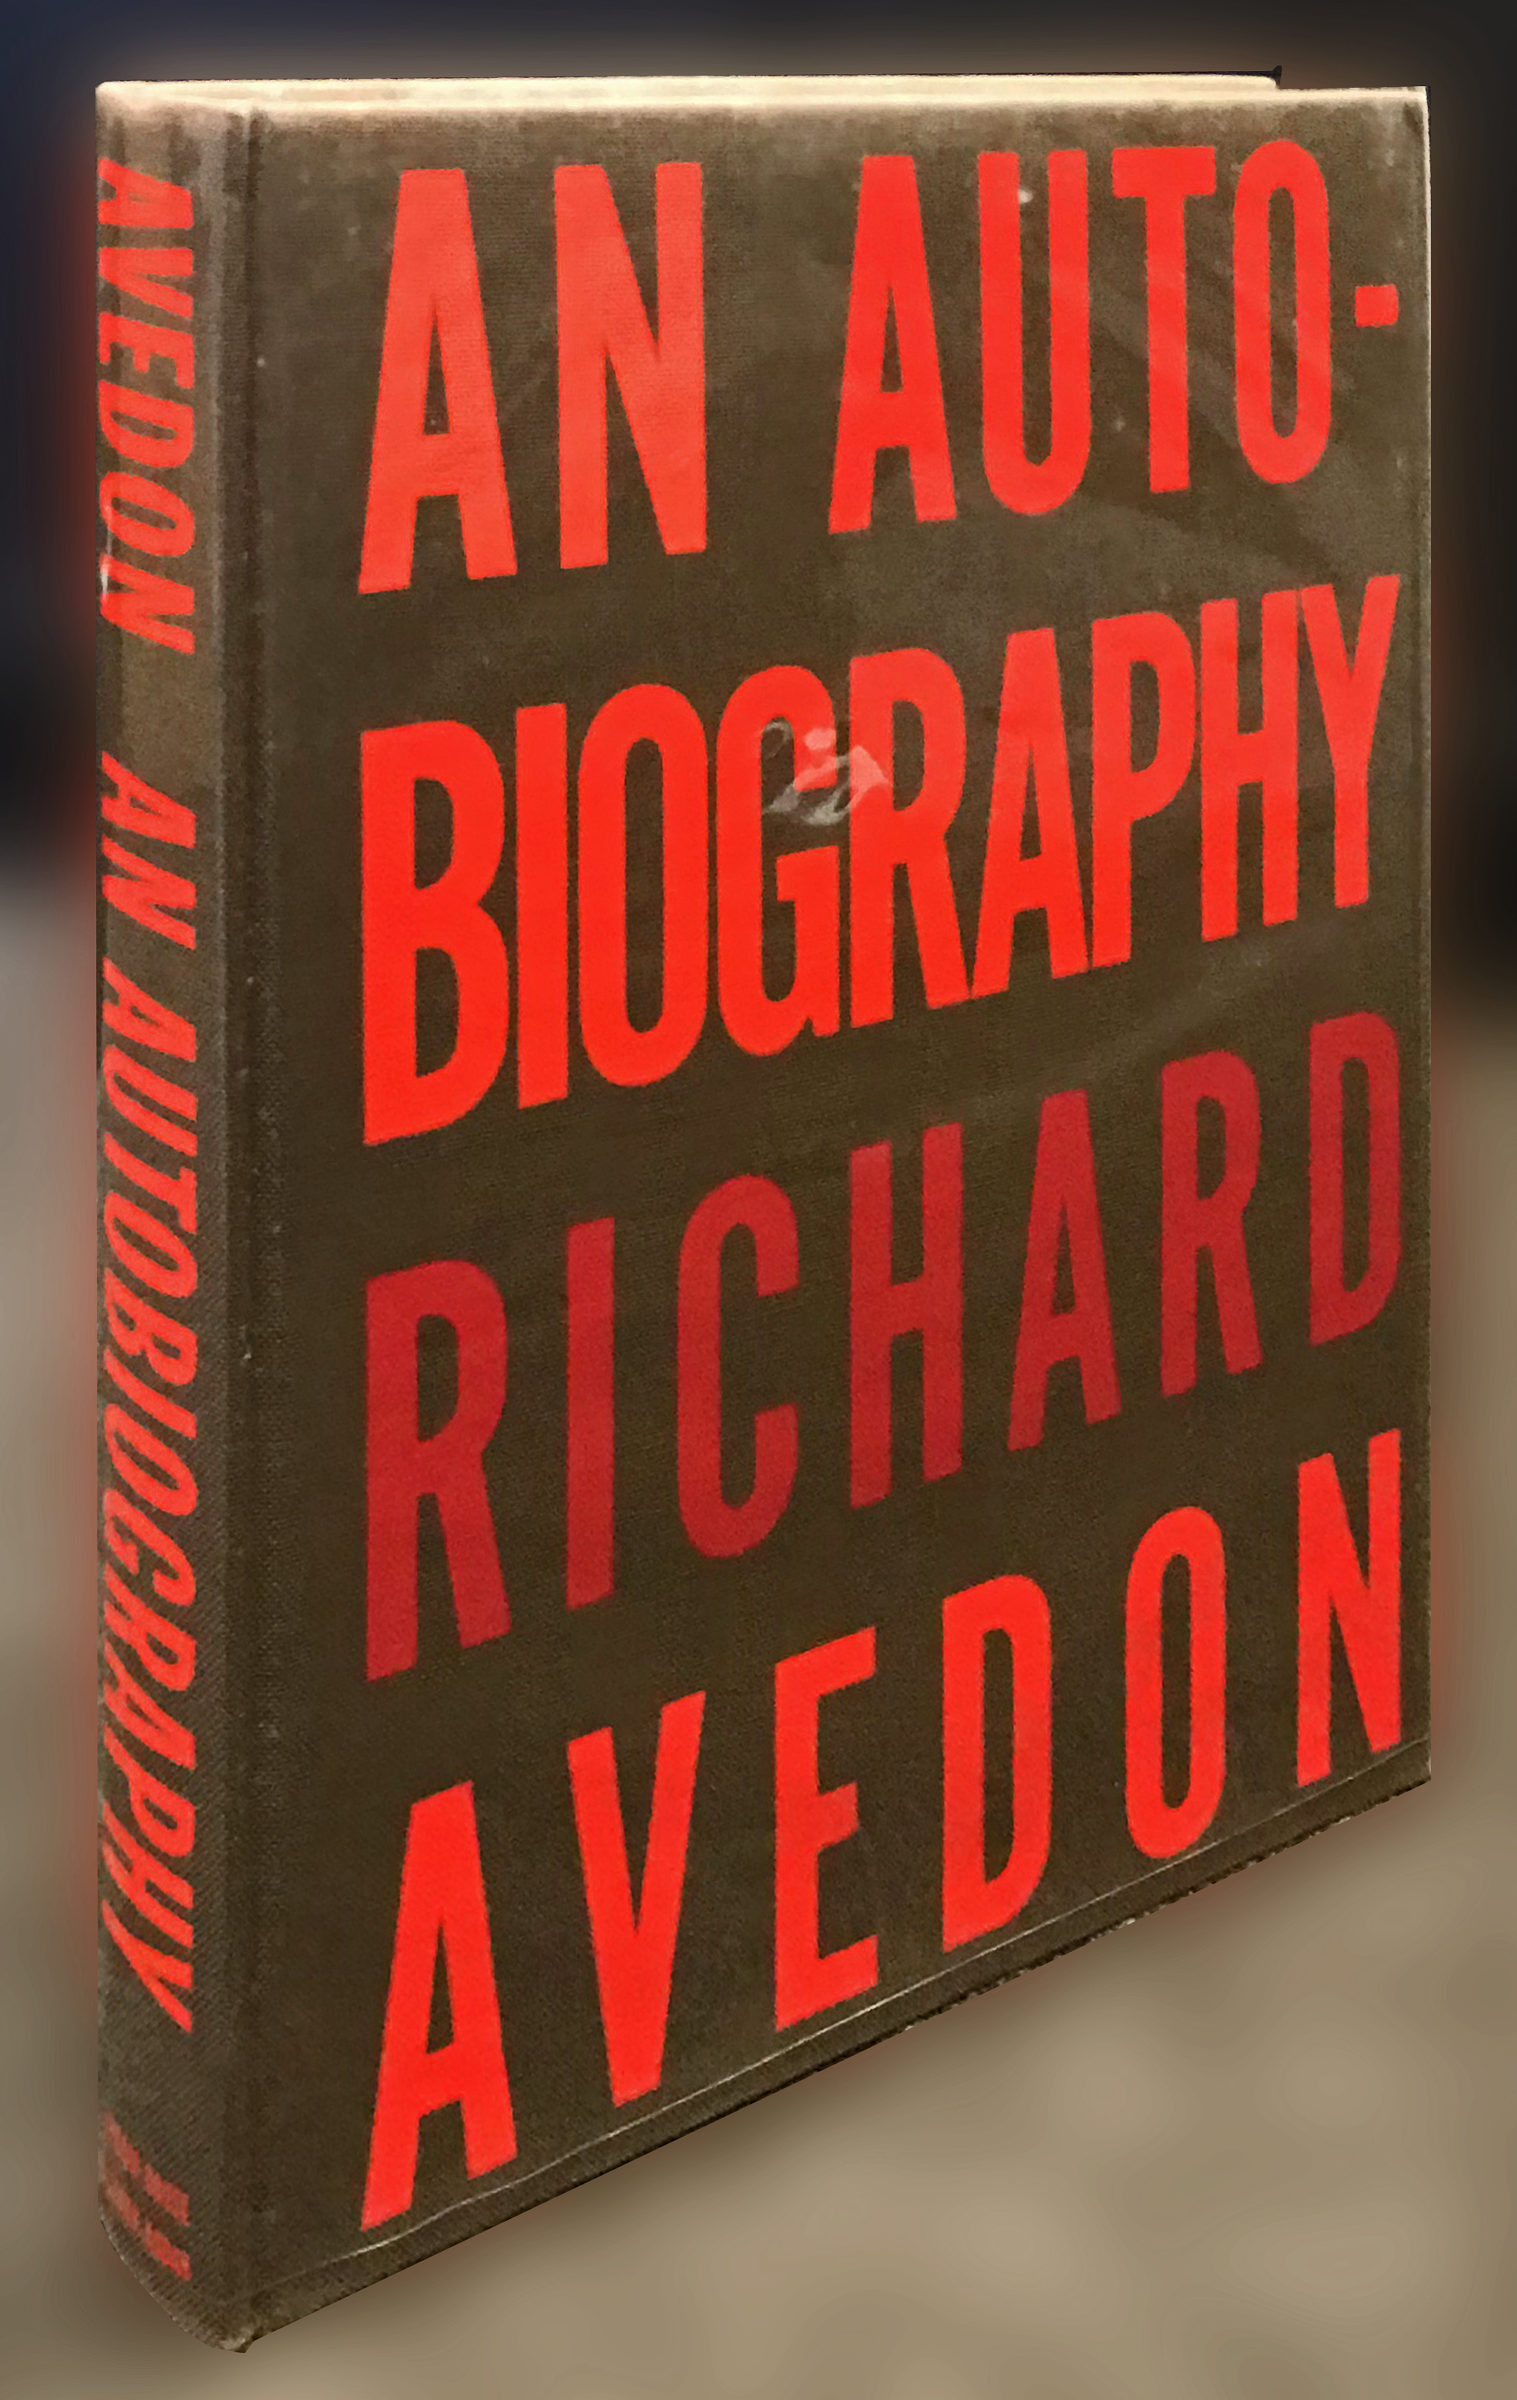 Avedon book cover and spine